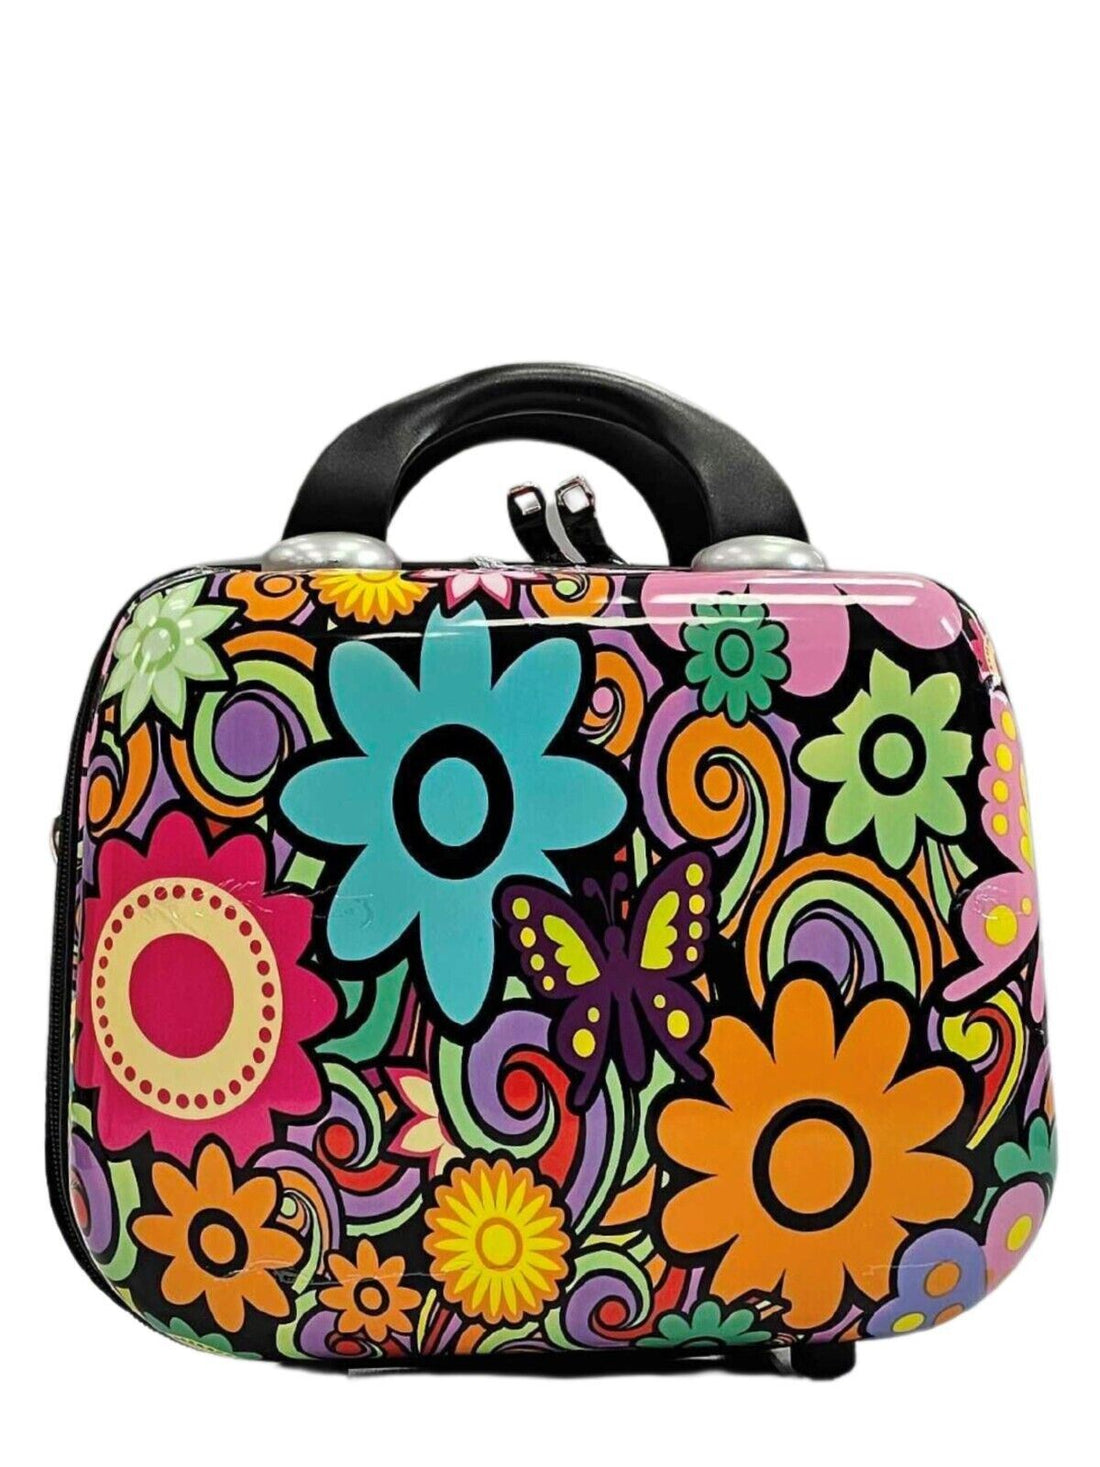 Chelsea Cosmetic Hard Shell Suitcase in Flower